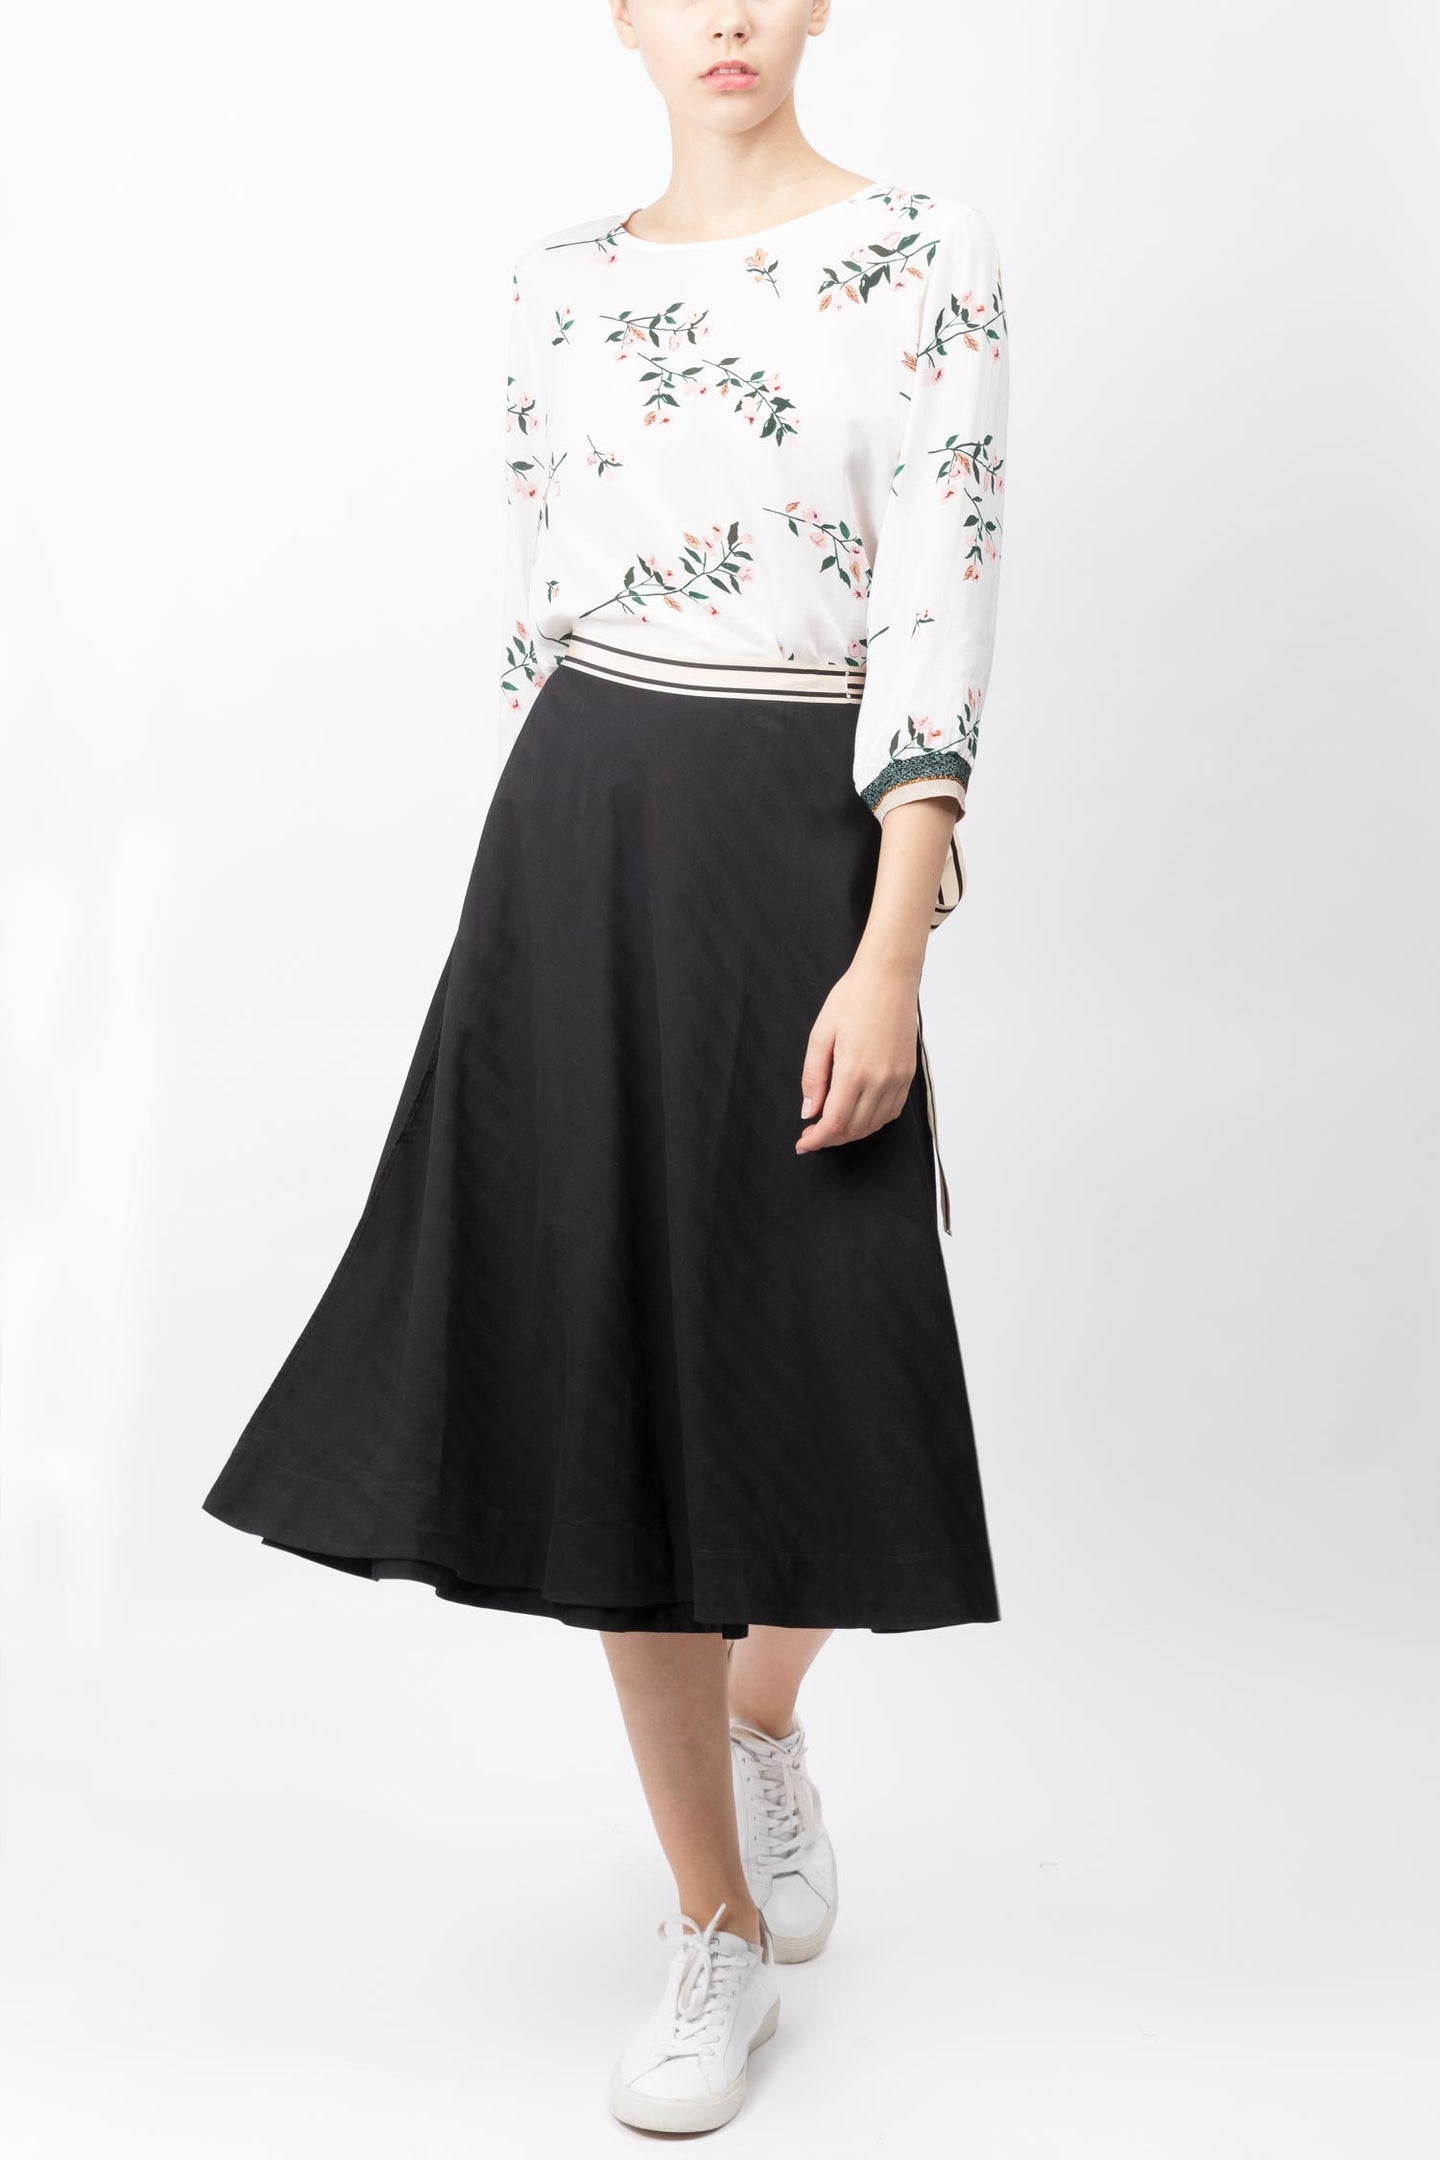 Bellerose dresses, skirts, tops, bags and clothings for women online